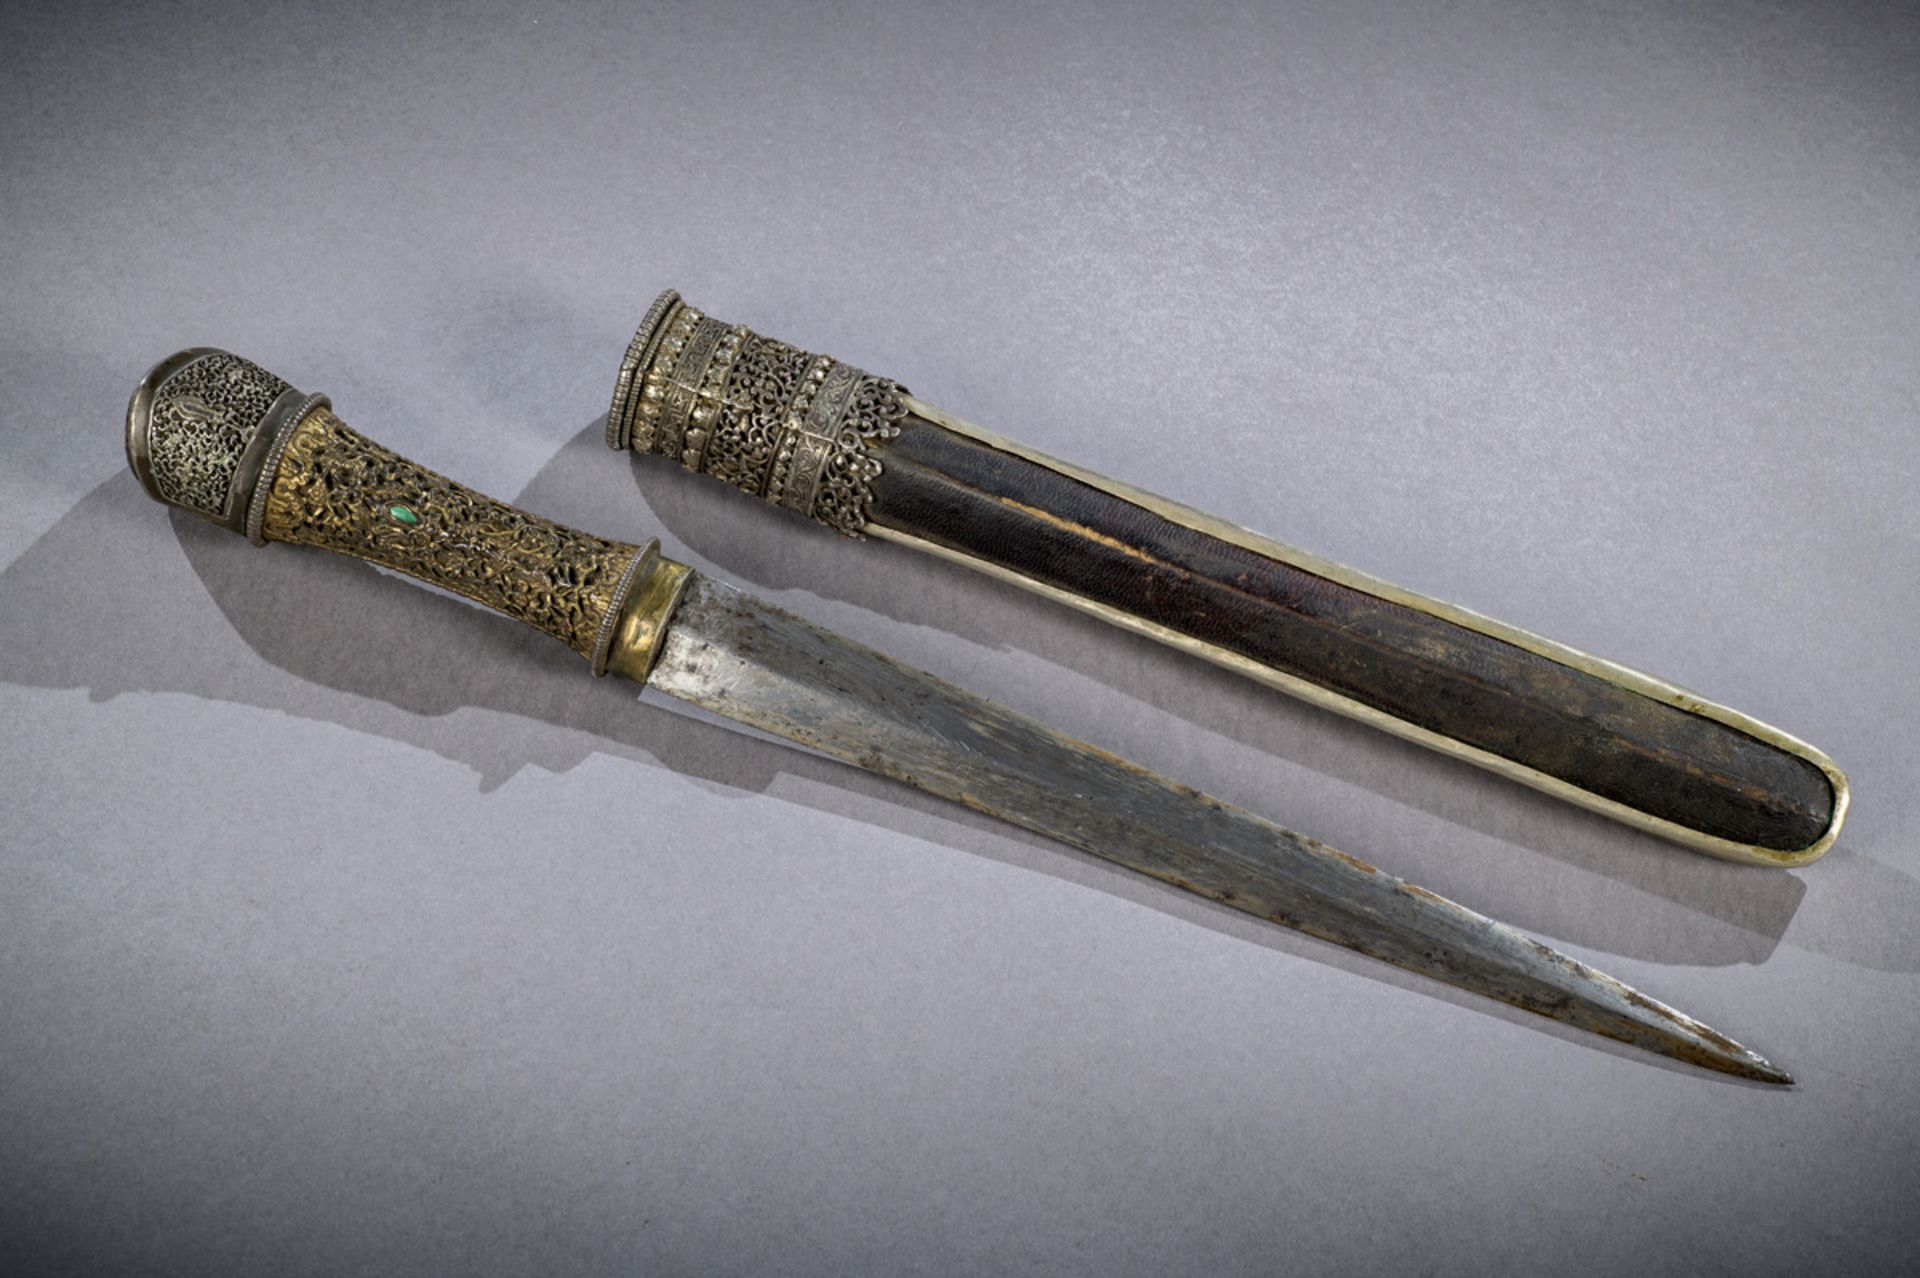 A dagger with openwork iron and gilt bronze decoration, Bhutan 18th - 19th century (tot 46.5 cm) - Image 3 of 7